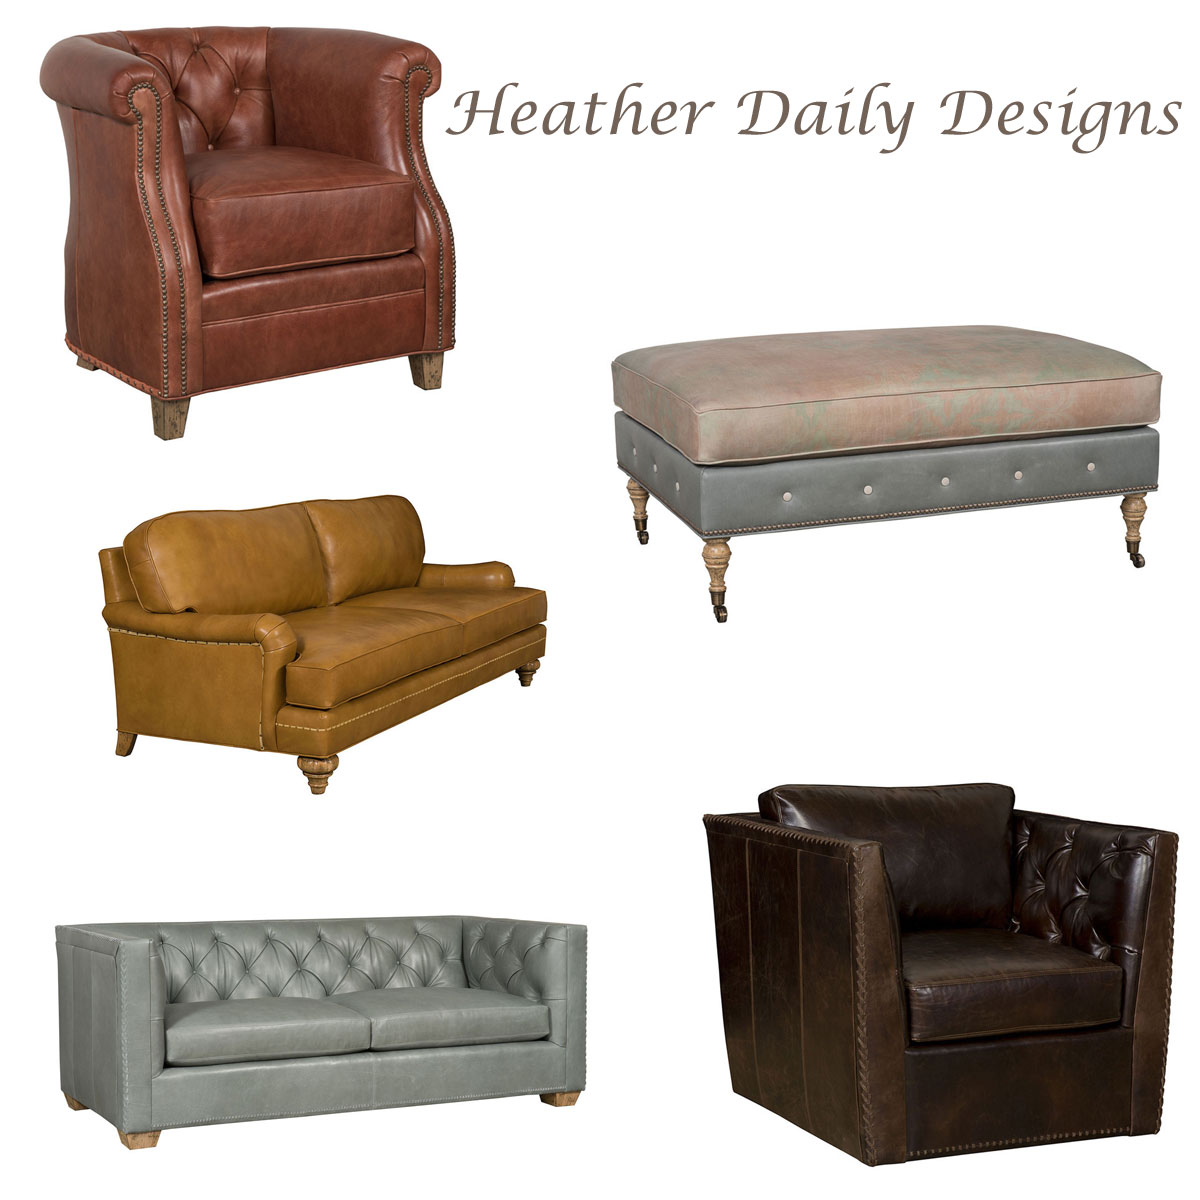  McKinley Leather Heather Daily Designs